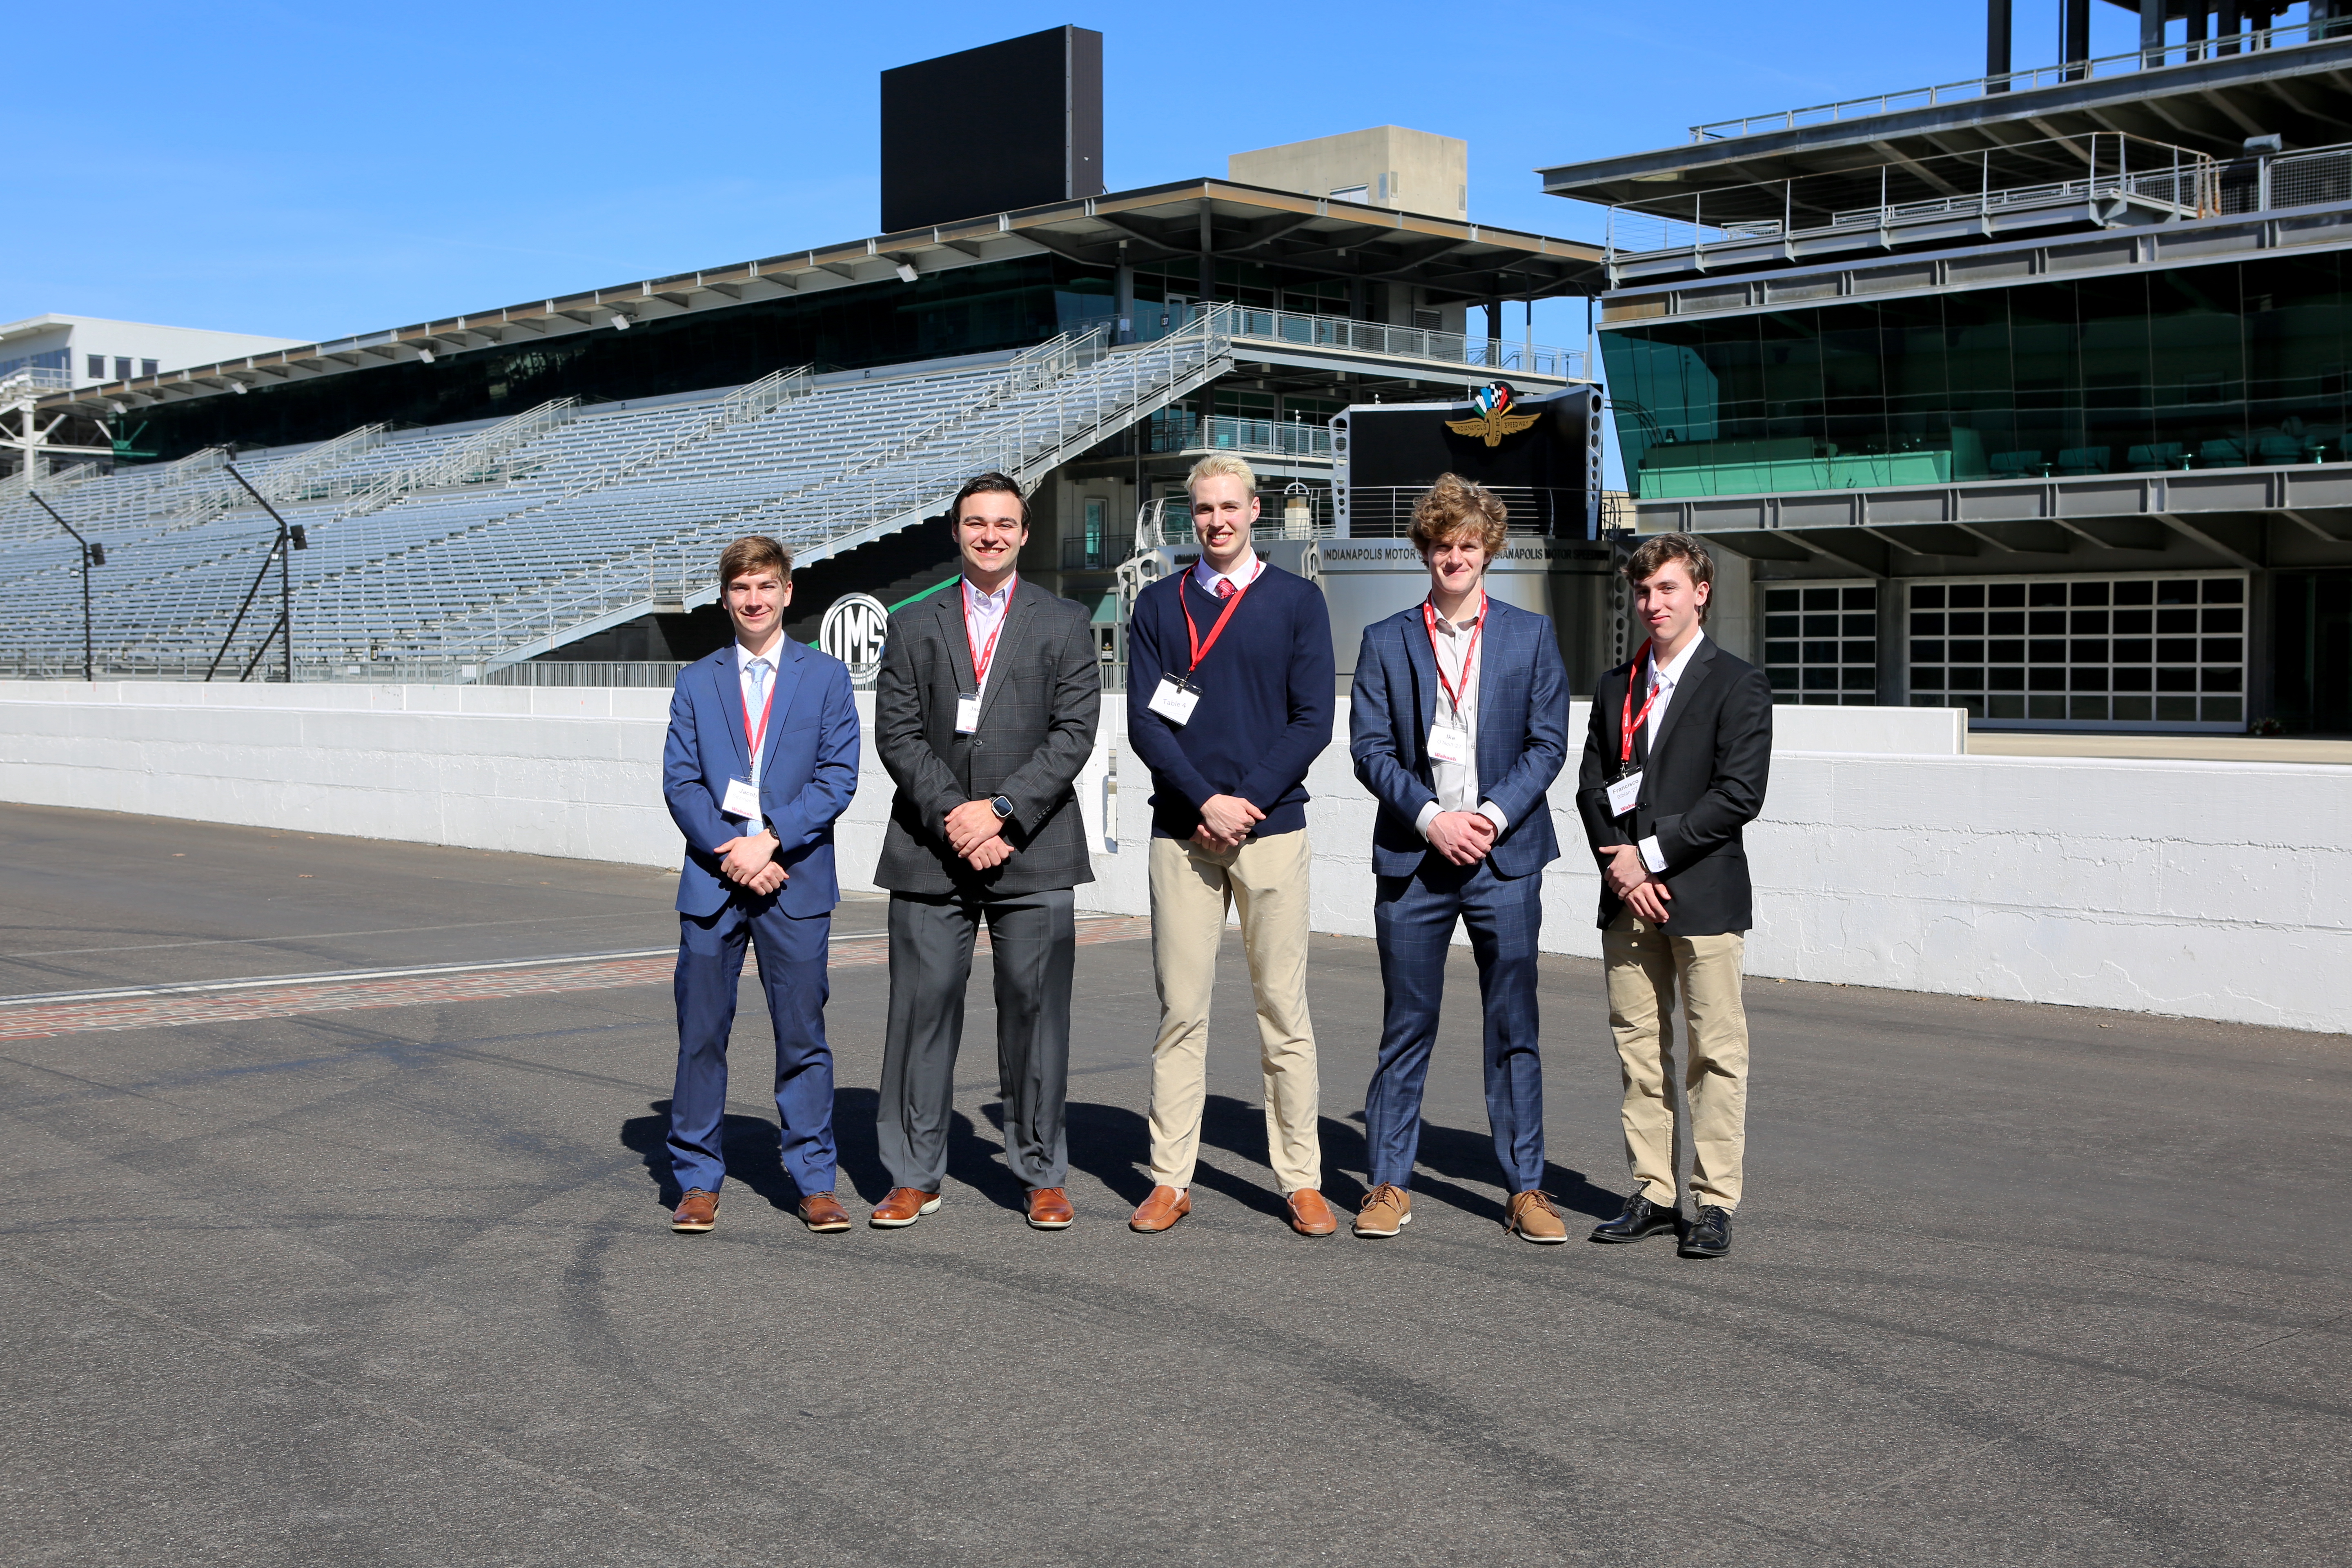 Scholarship recipients enjoyed this year's recognition program at the Indianapolis Motor Speedway (IMS).